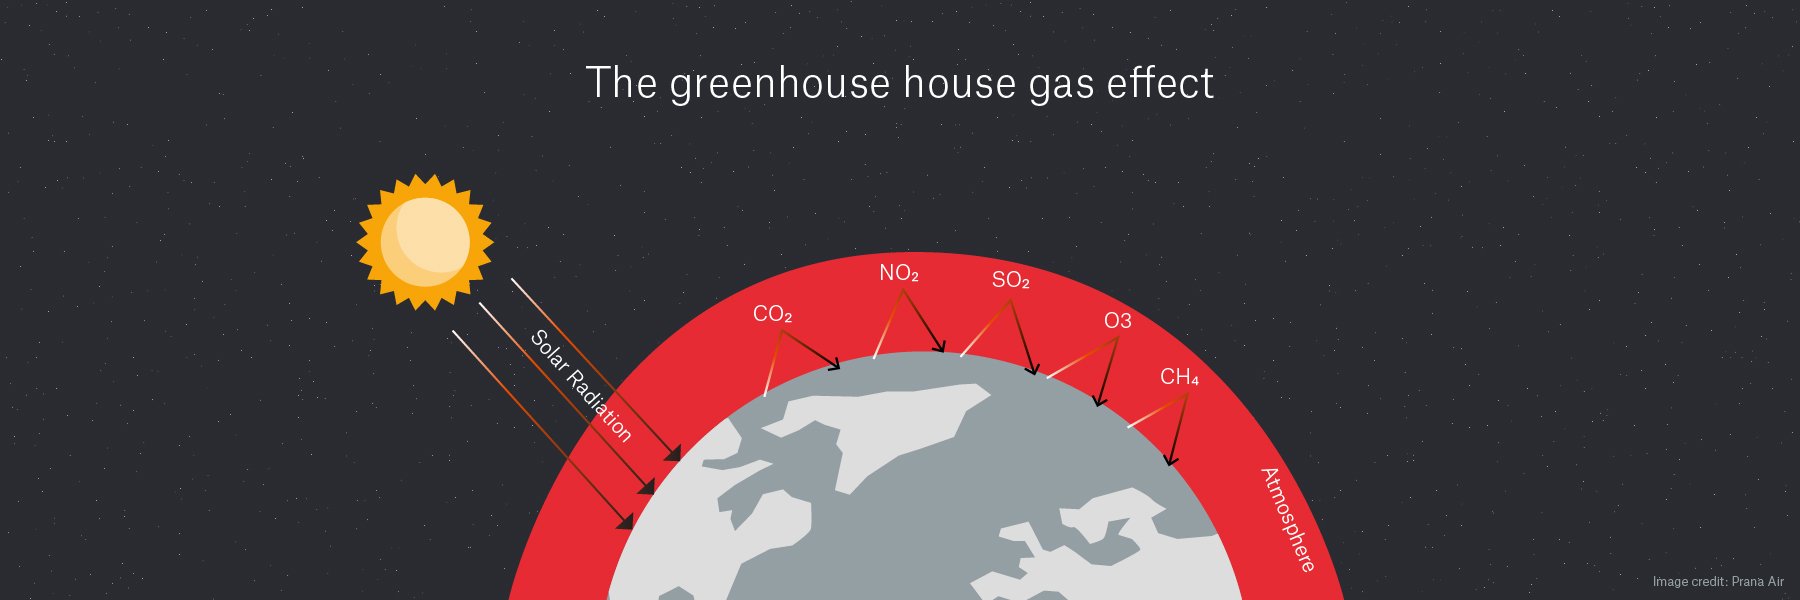 GHG Emissions-Greenhouse-Effects-And-Its-Causes_1800x600